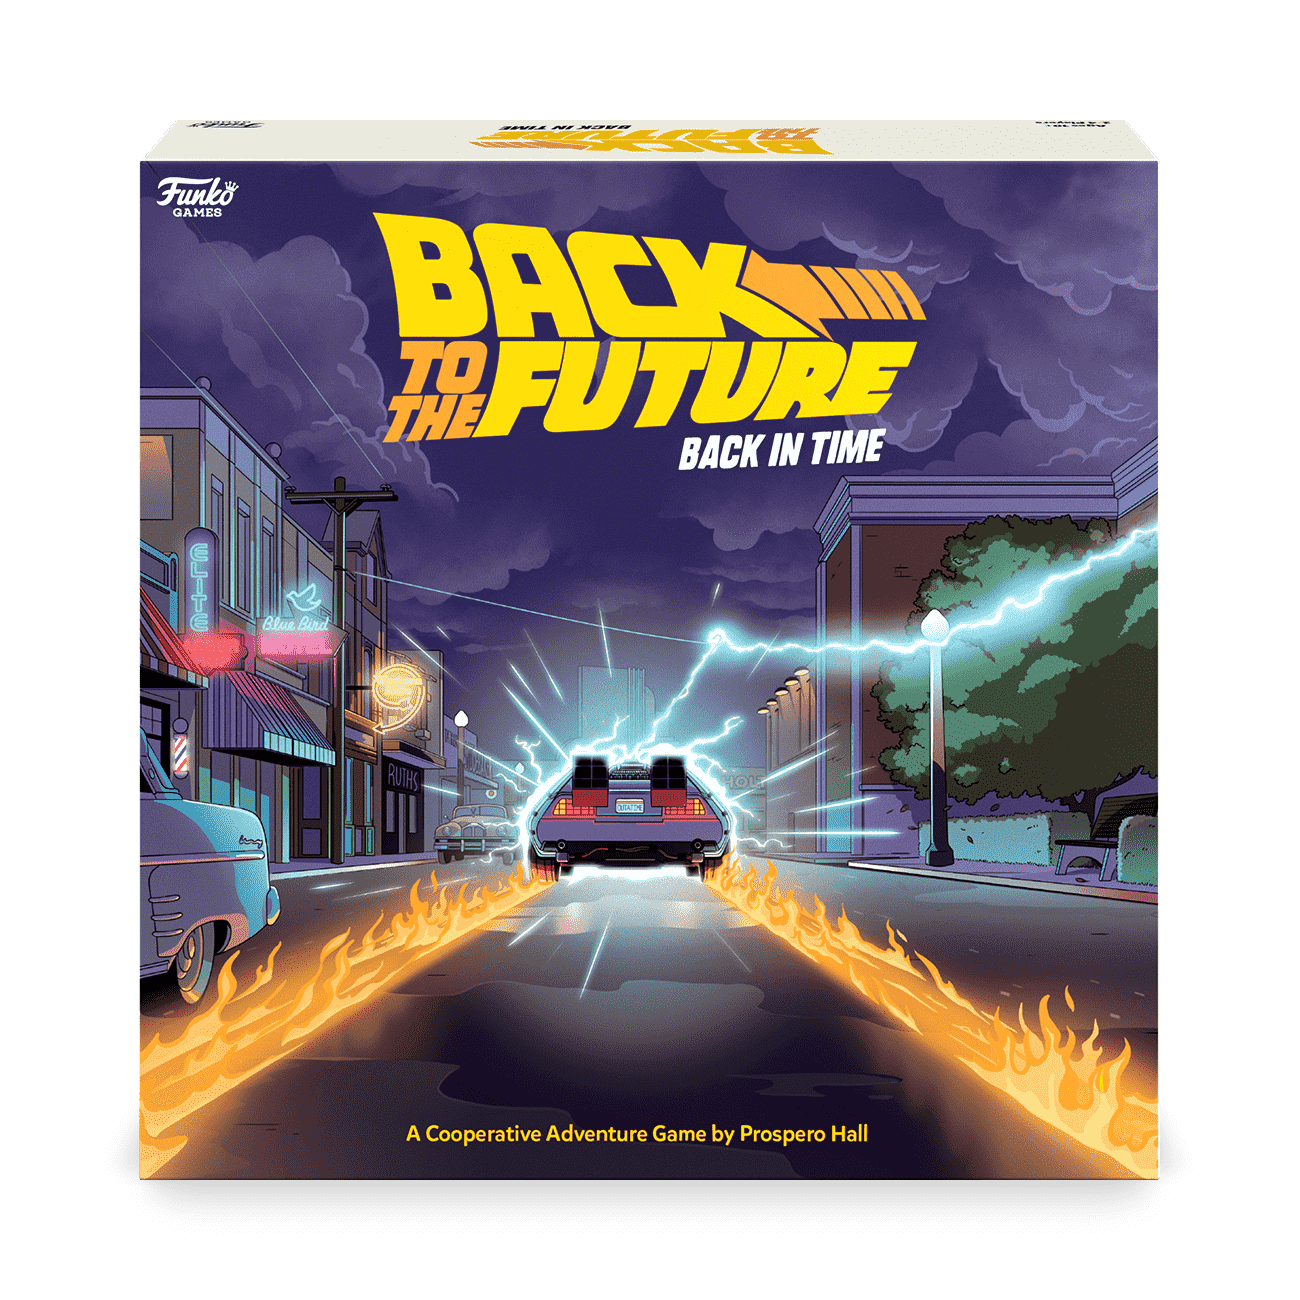 Buy Back the Future - Back in Time Board at Funko.